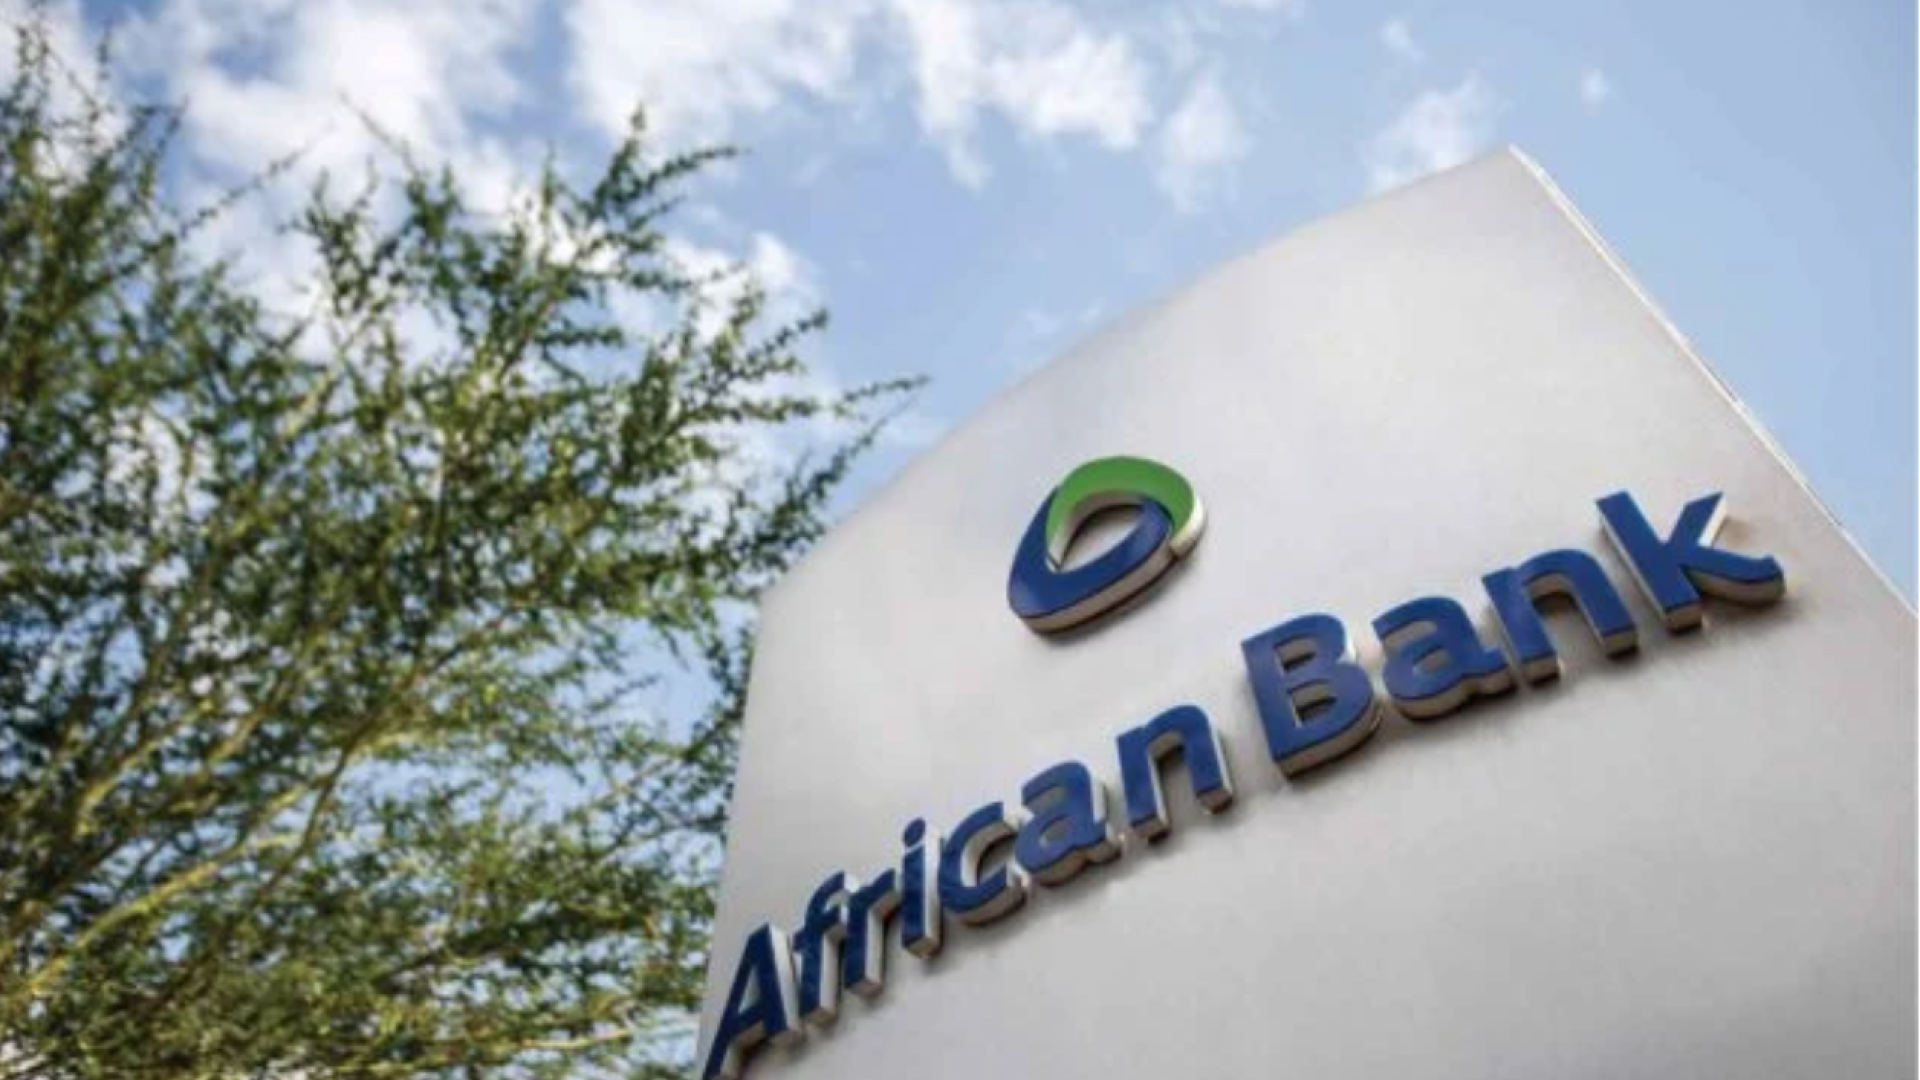 african-bank-partners-with-loylogic-and-pinnacle-rewards-to-introduce-new-world-class-loyalty-program